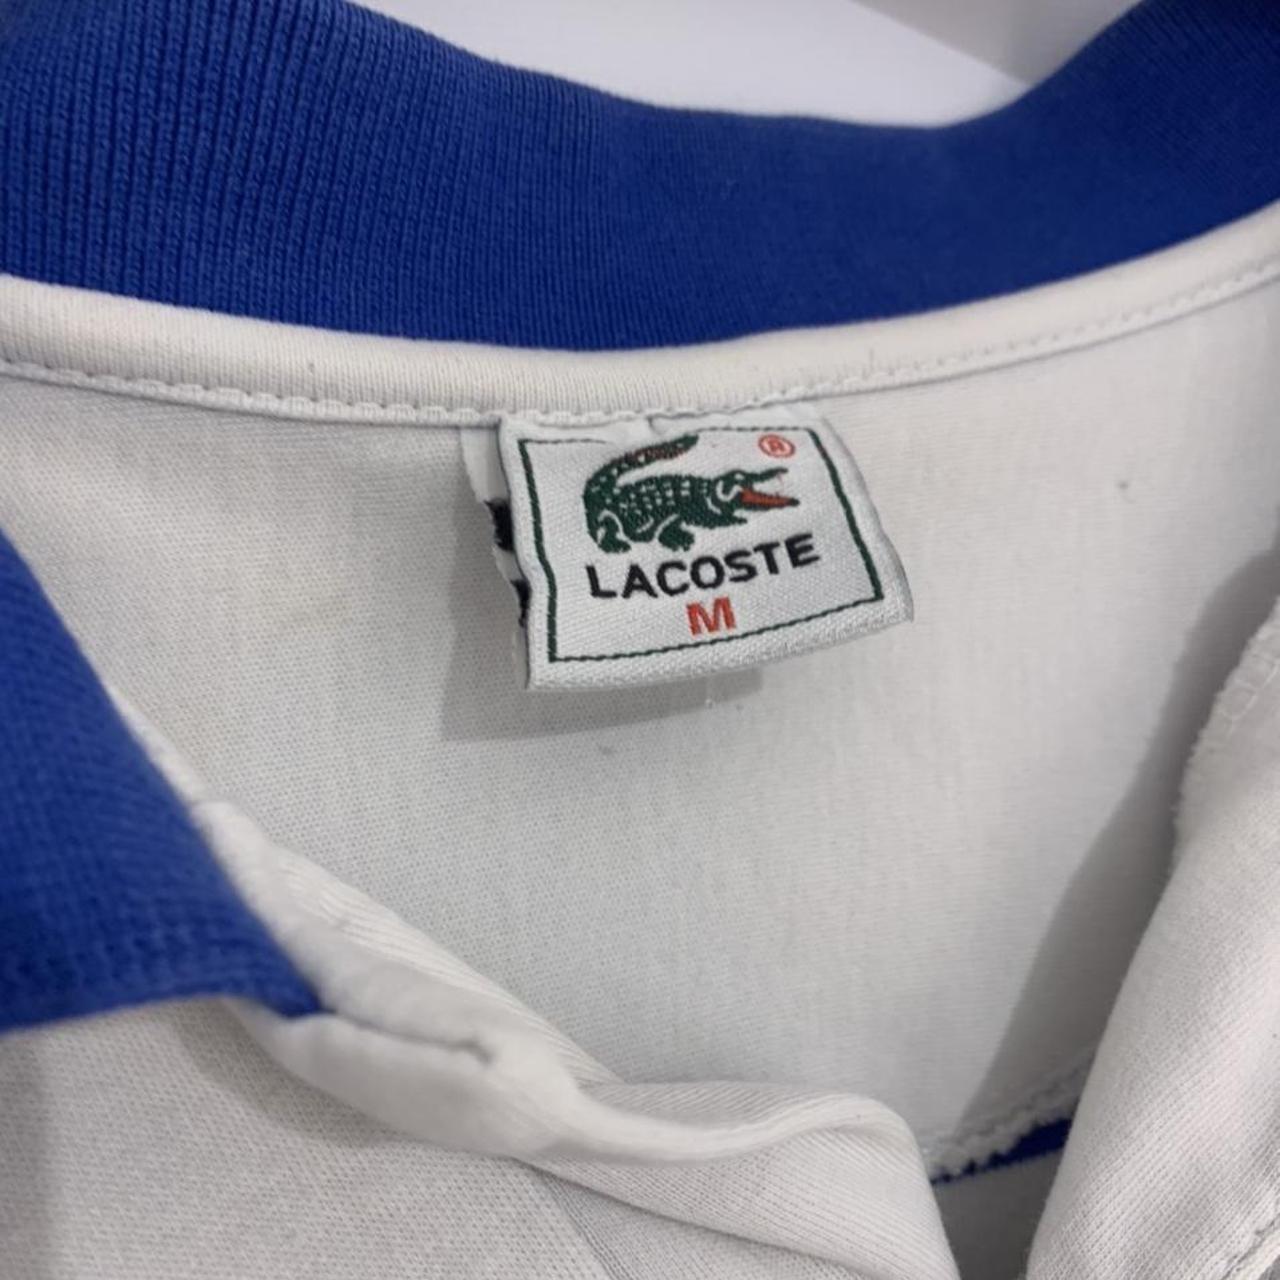 Lacoste Men's Navy and White Polo-shirts | Depop